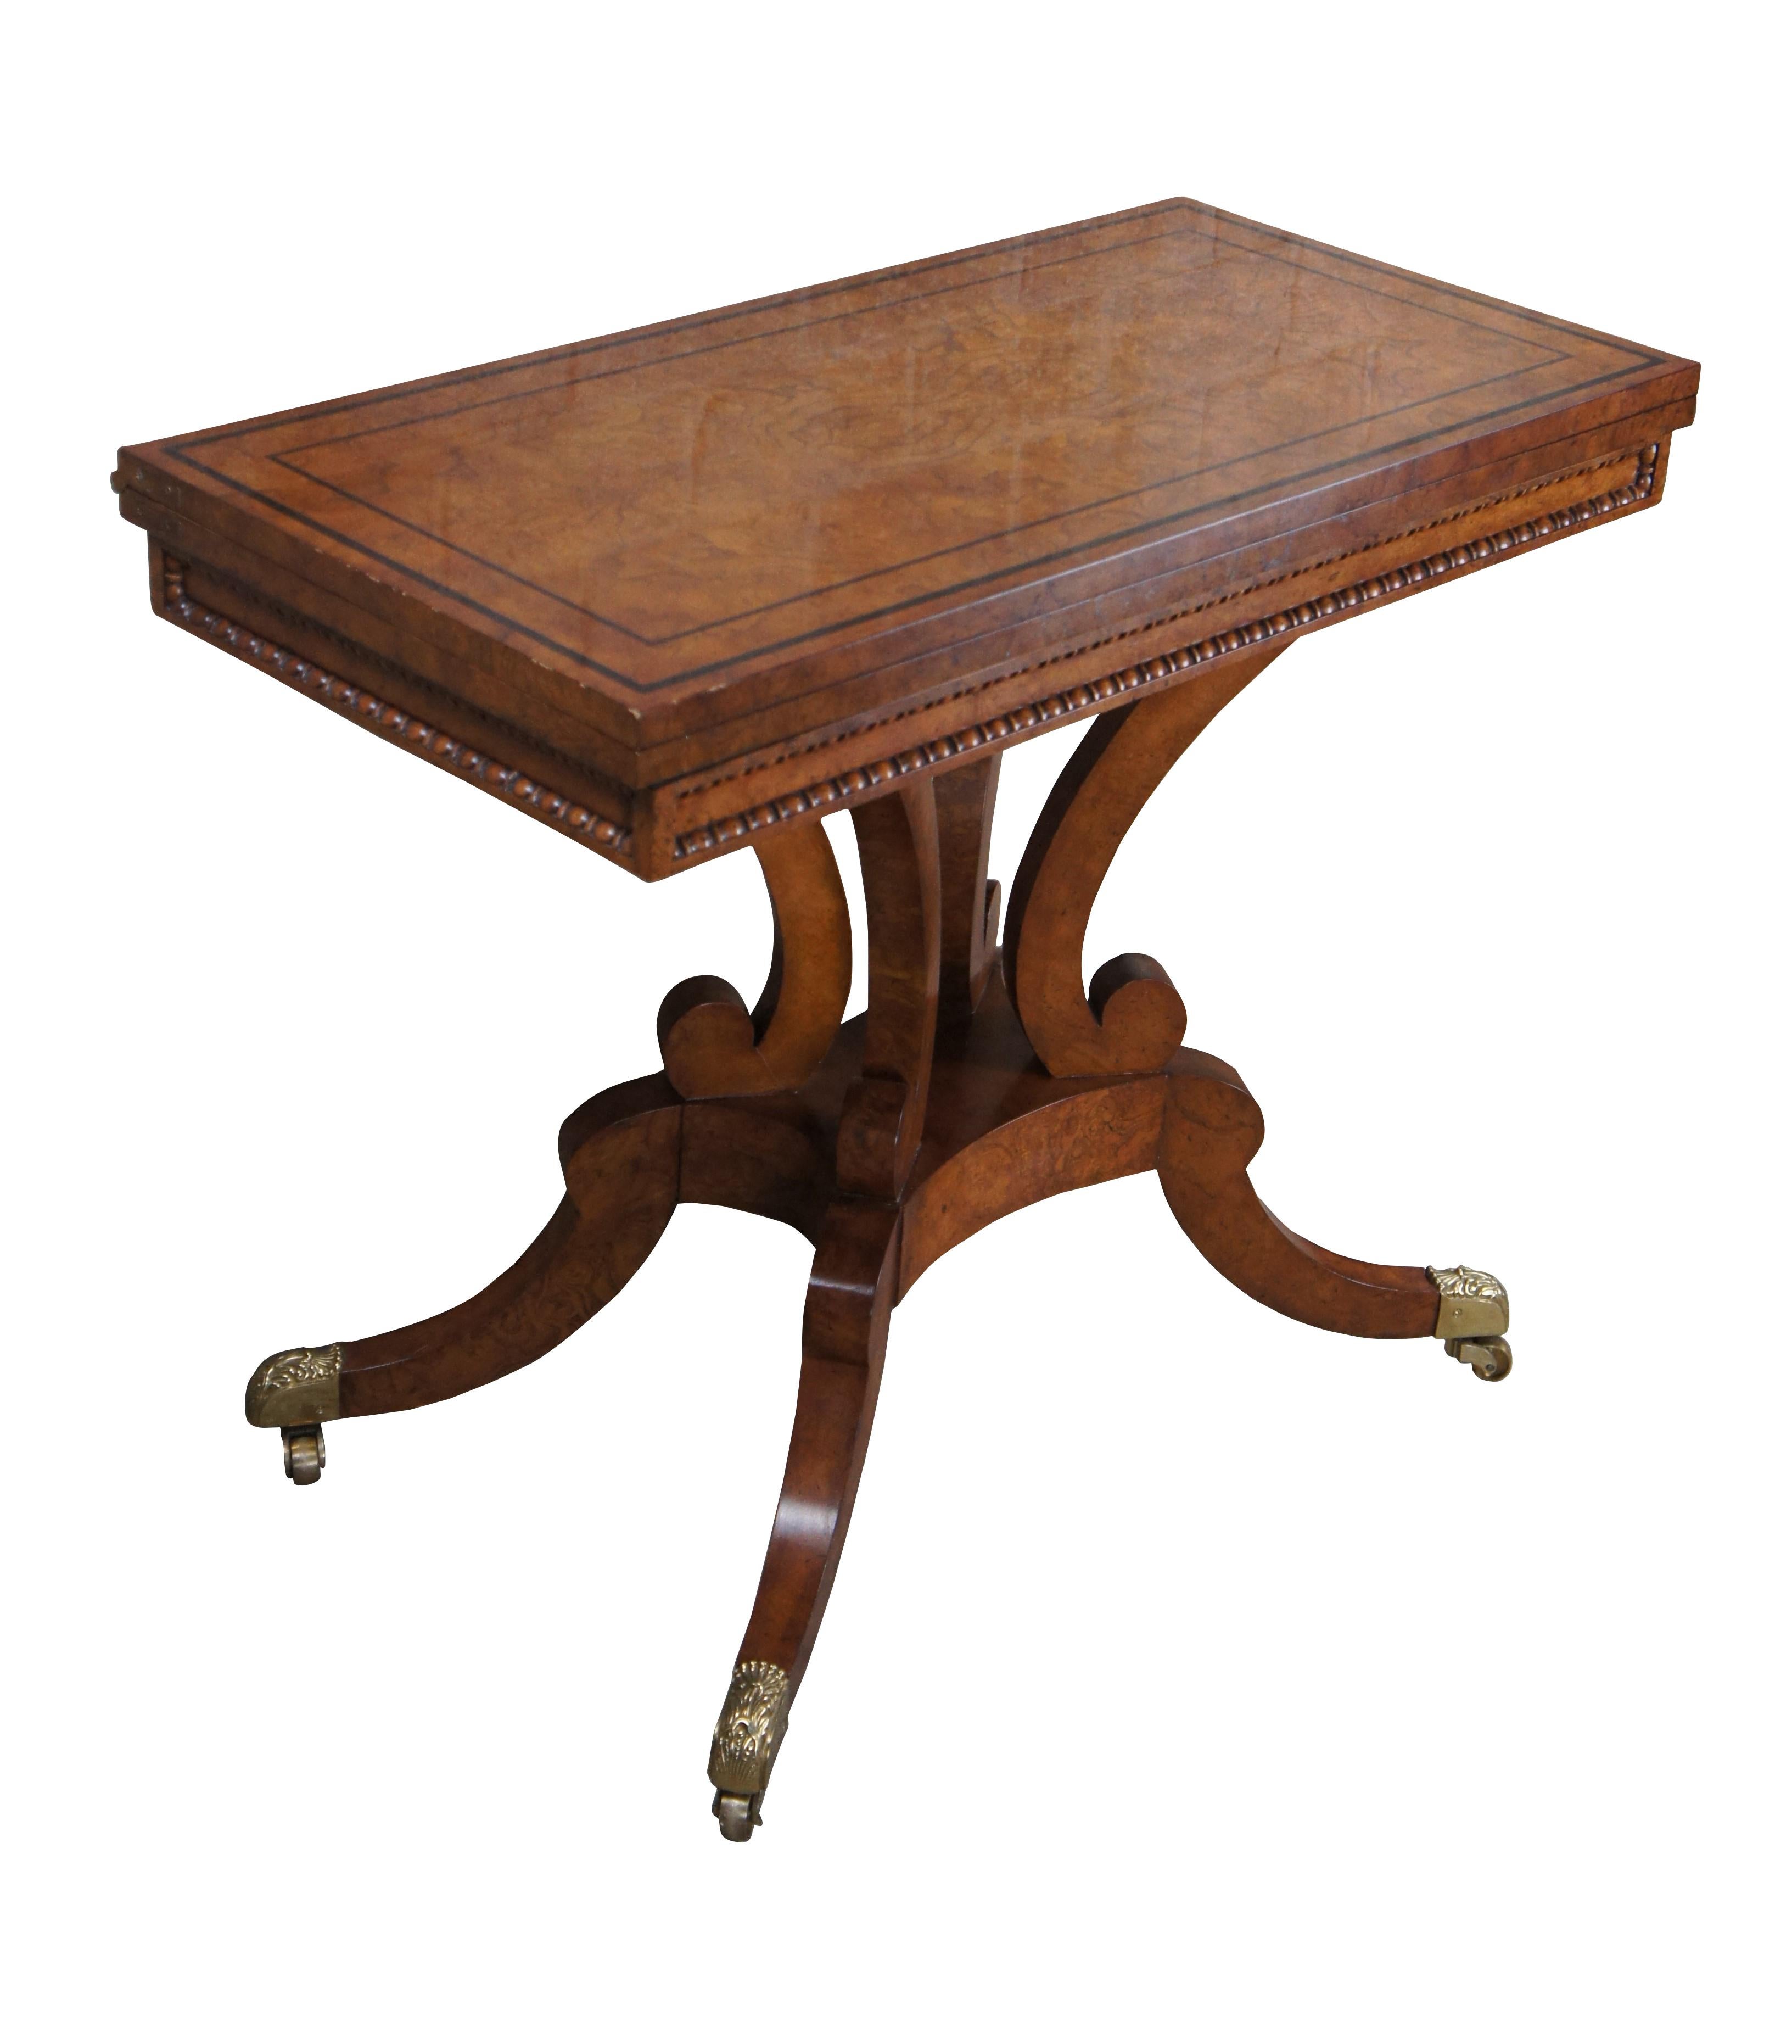 An exceptional English Regency / Georgian inspired Flip top game table or console by Baker Furniture. The design is after the Original made by William Trotter of Edinburgh in 1815. 

The rectangular fold over top has a beaded moulded edge, and